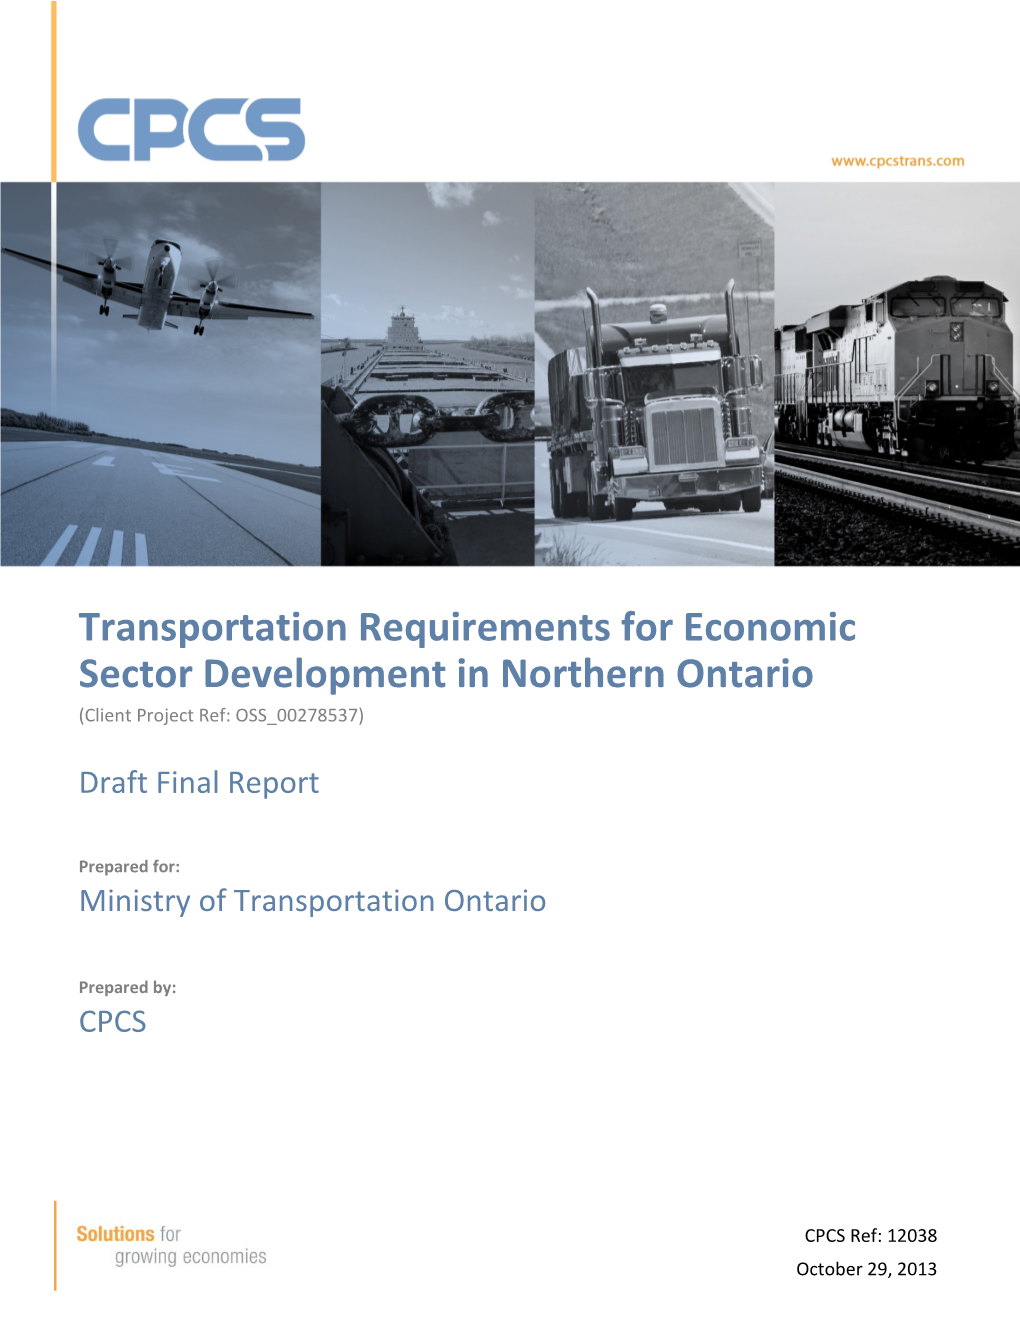 Transportation Requirements for Economic Sector Development in Northern Ontario (Client Project Ref: OSS 00278537)